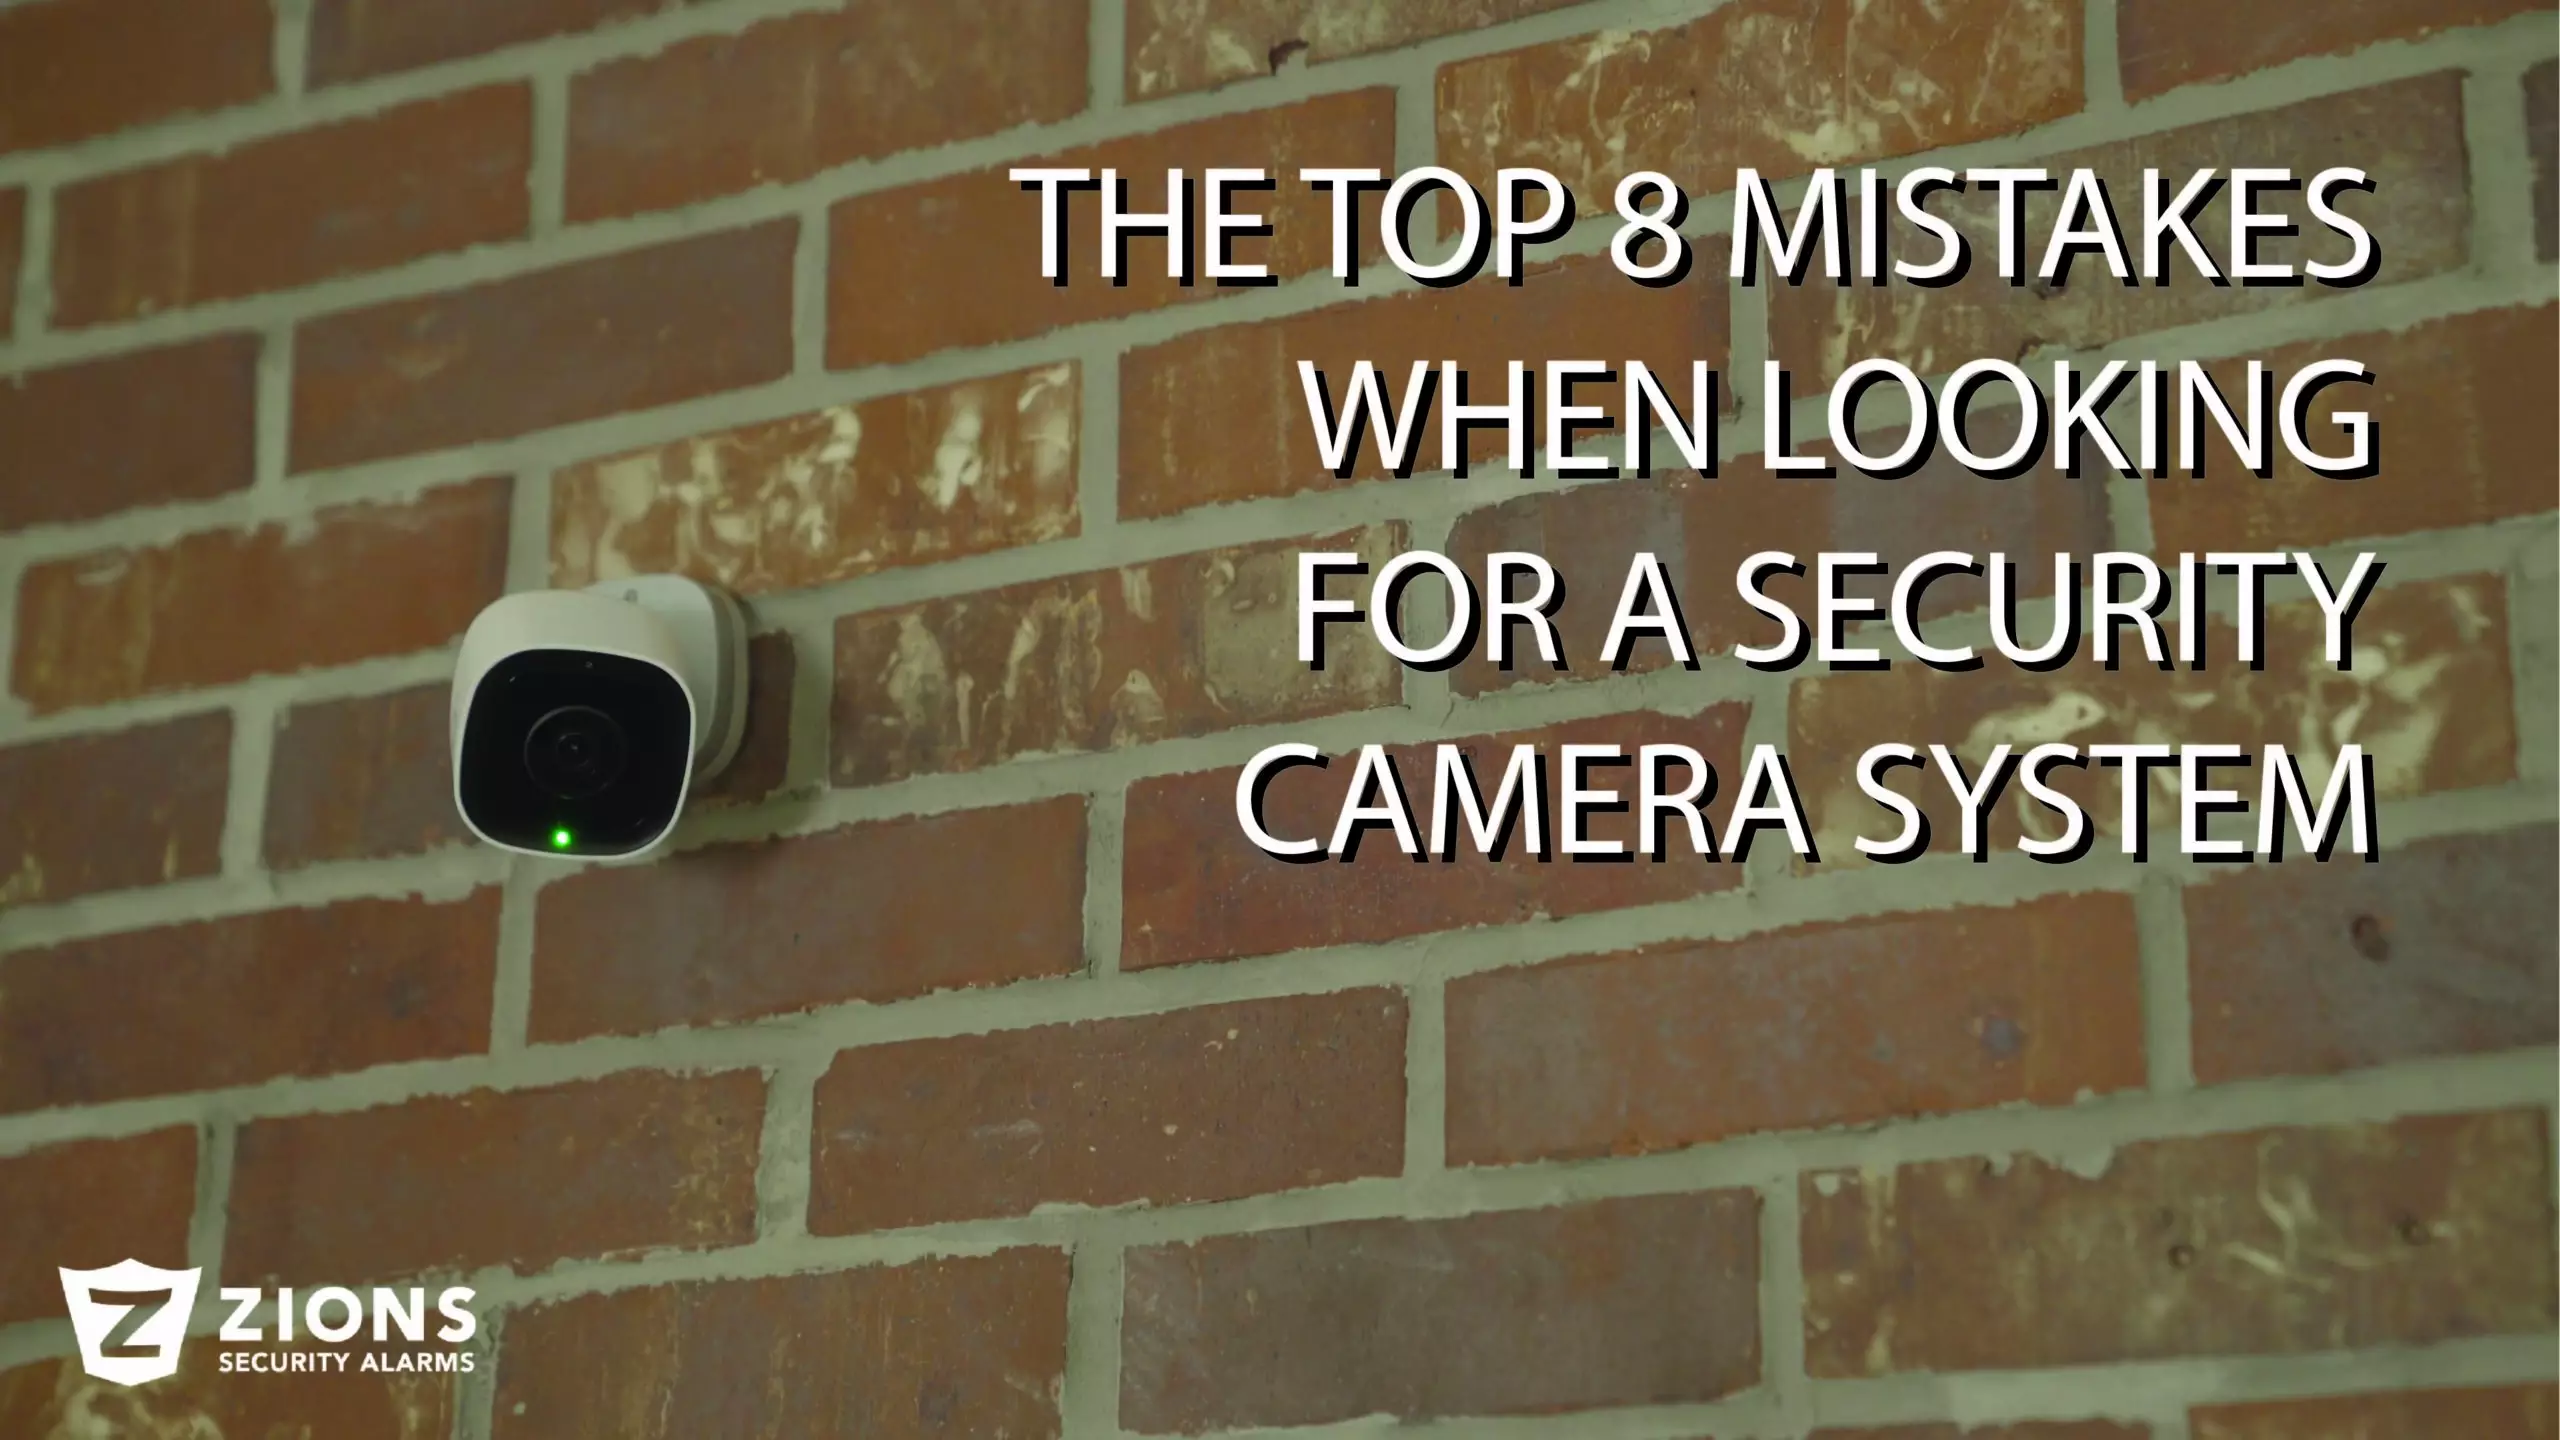 The Top 8 Mistakes When Looking For Security System